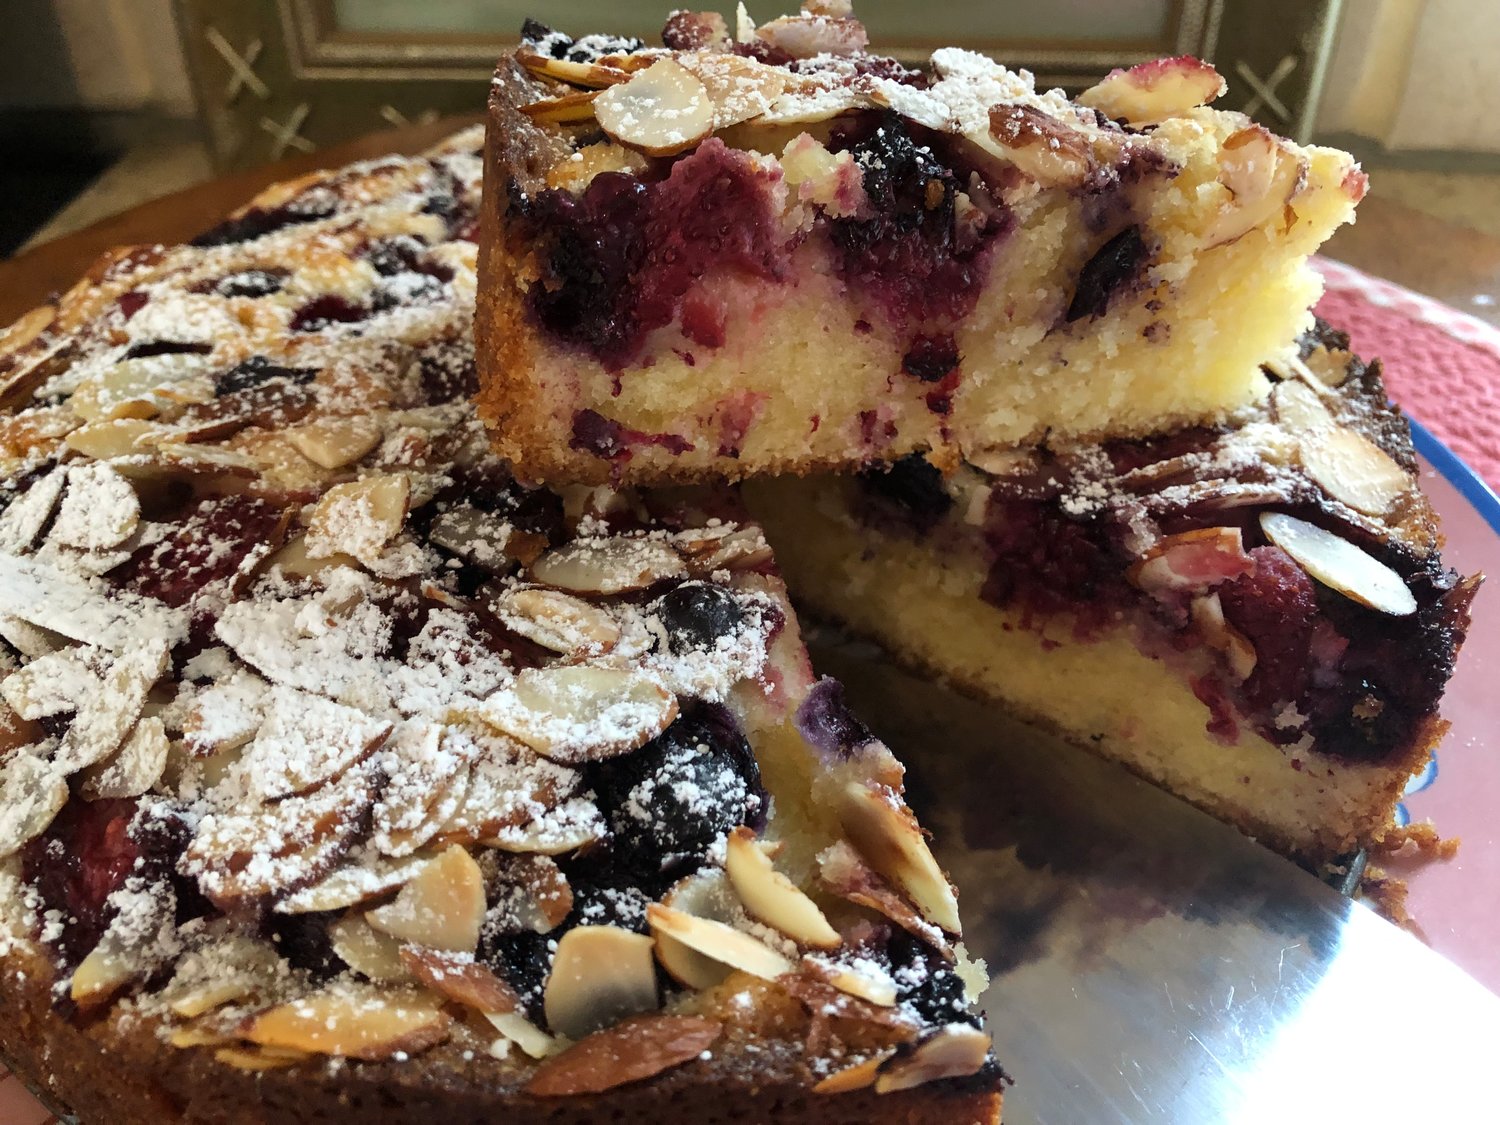 This fruit-topped coffee cake is made with frangipane, a creamy and classic French pastry filling made from ground almonds, butter, sugar and eggs.